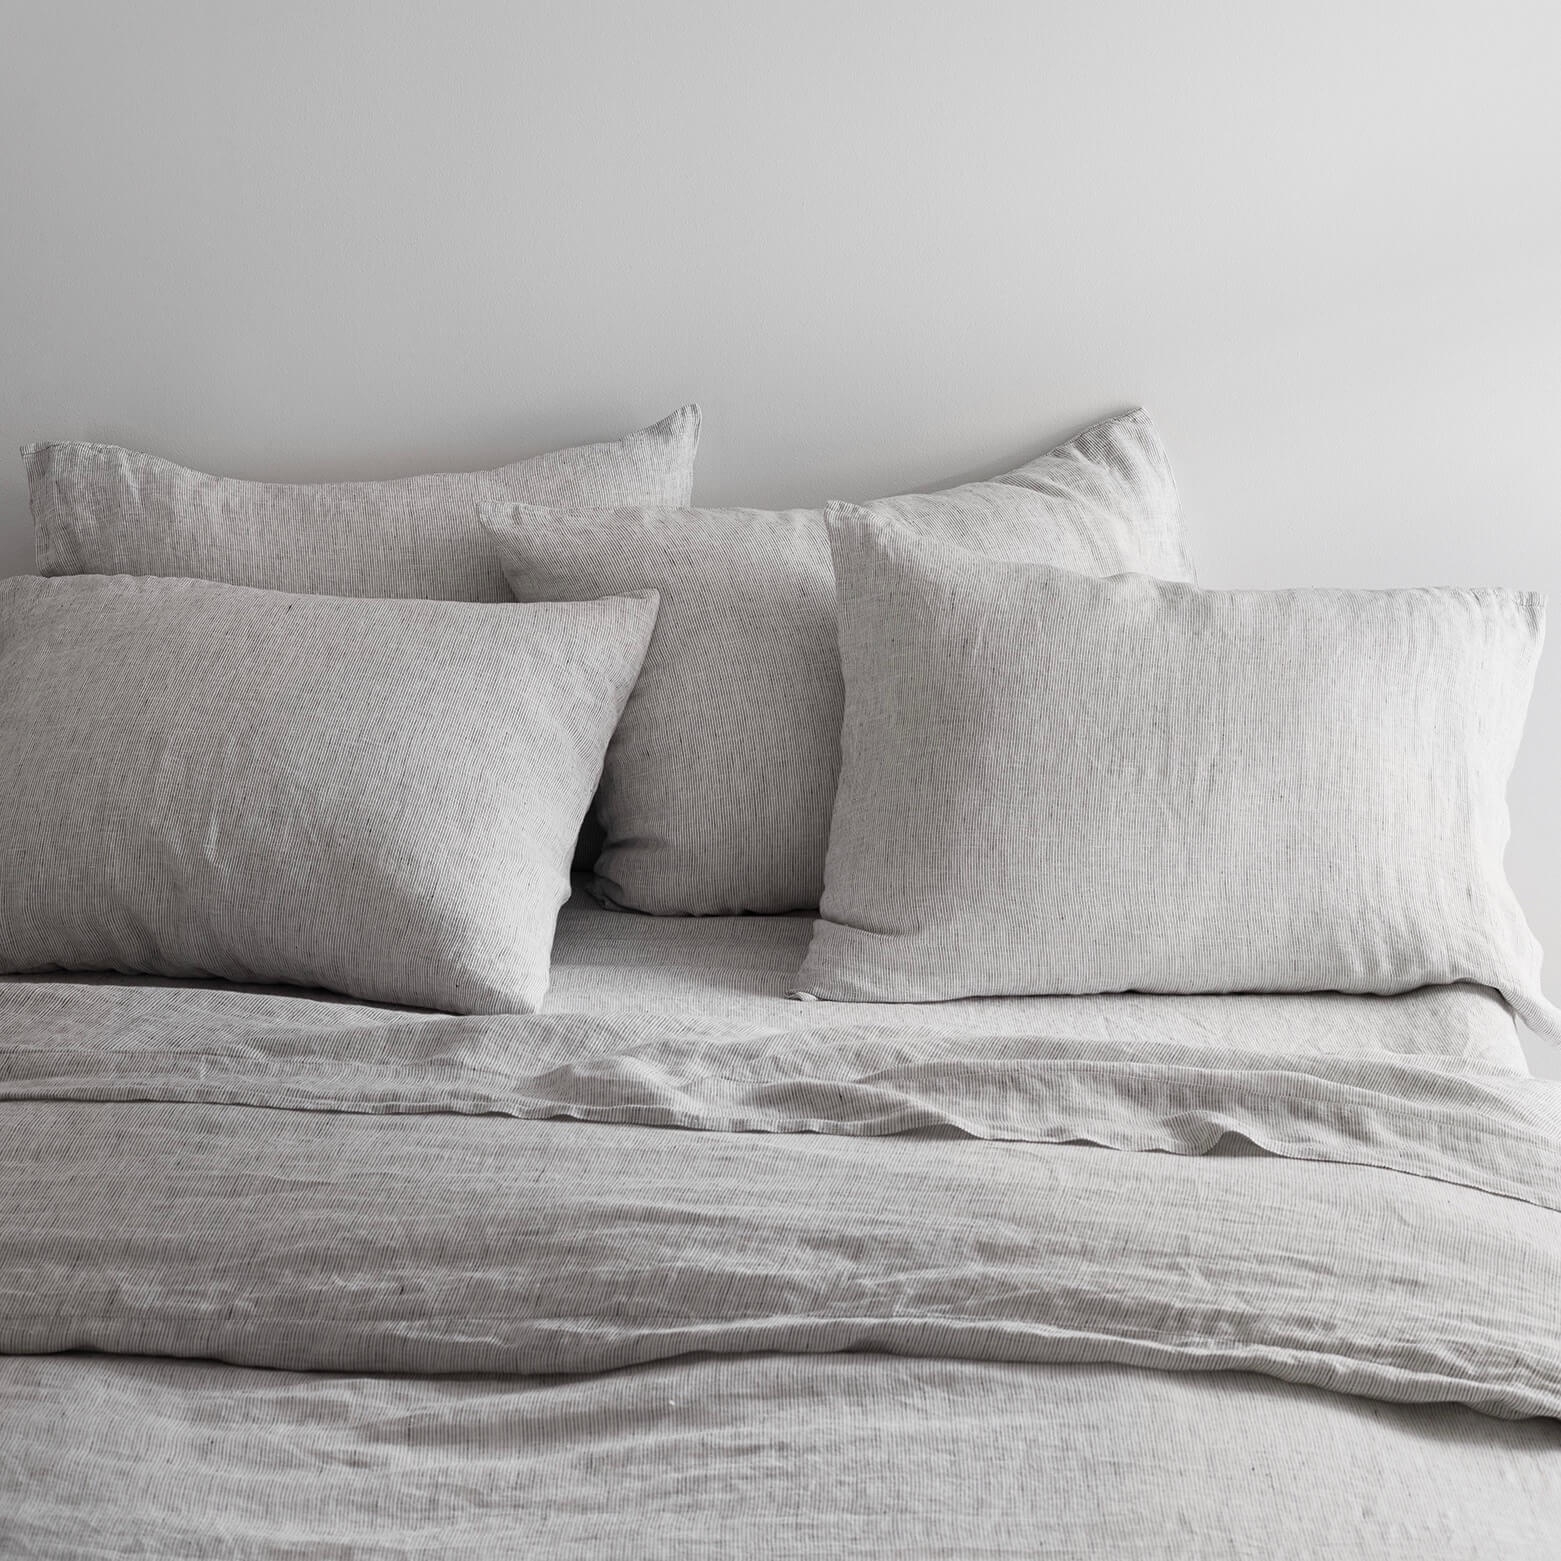 The Citizenry Stonewashed Linen Duvet Cover | Full/Queen | Duvet Only | Sienna - Image 3